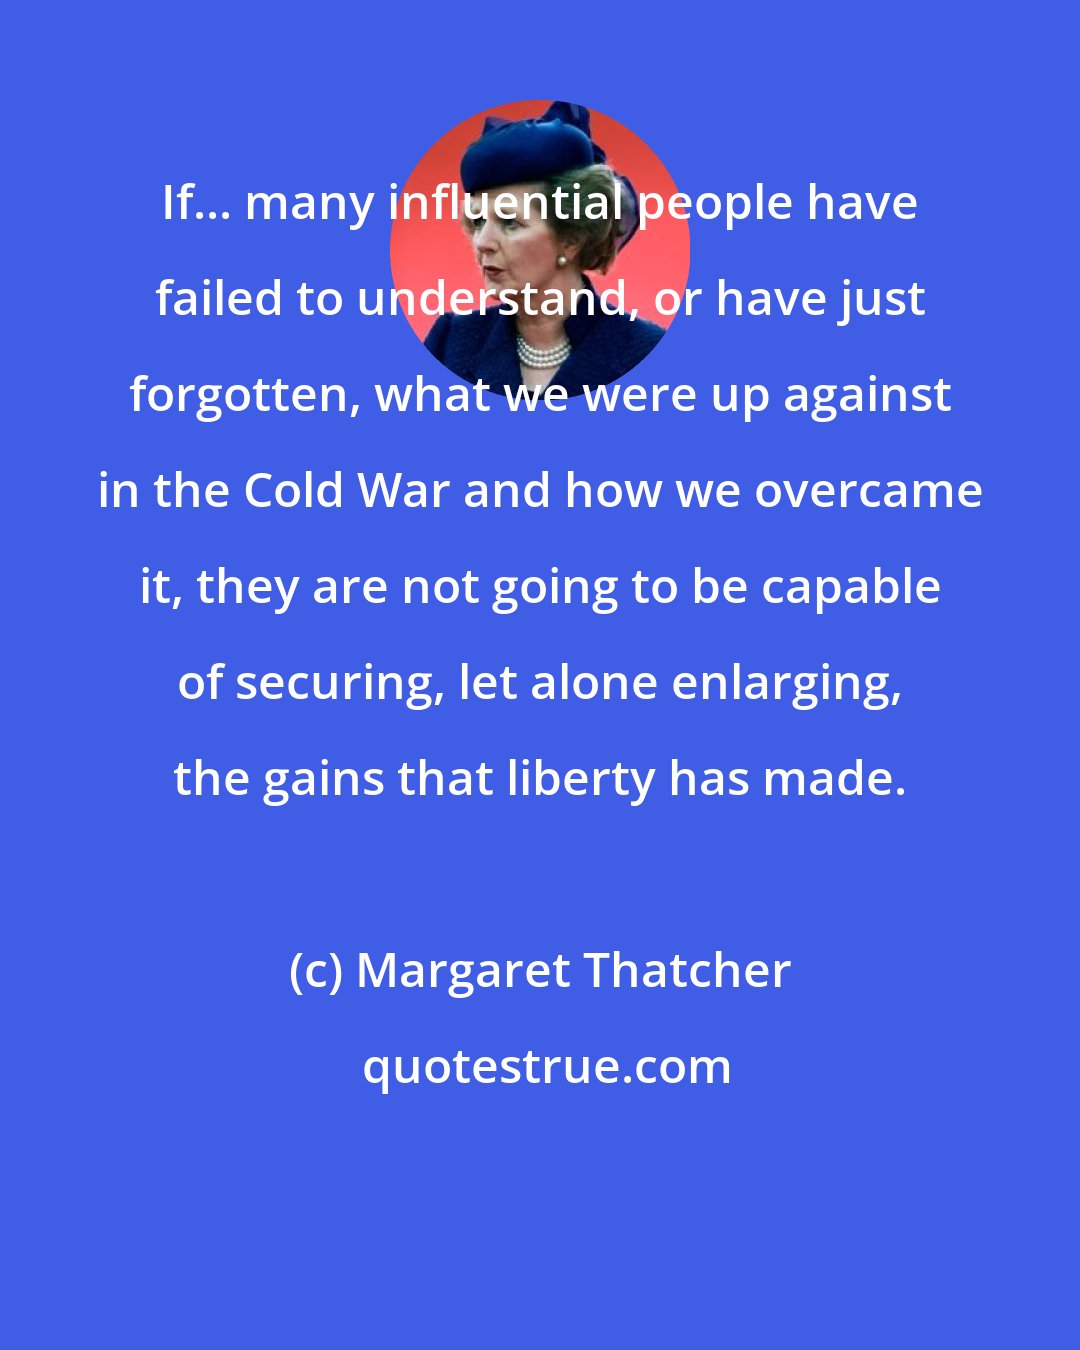 Margaret Thatcher: If... many influential people have failed to understand, or have just forgotten, what we were up against in the Cold War and how we overcame it, they are not going to be capable of securing, let alone enlarging, the gains that liberty has made.